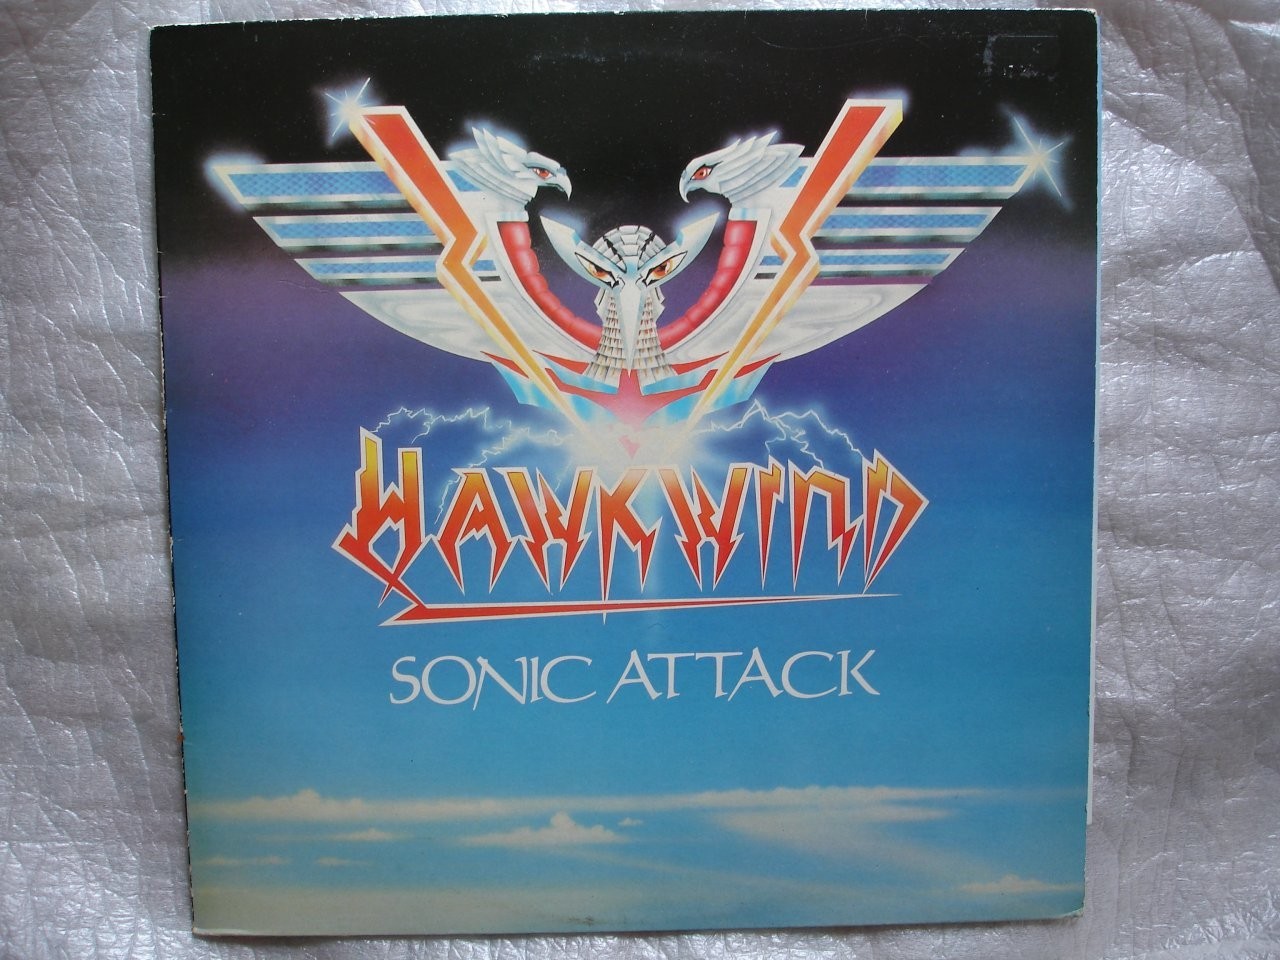 Группа Hawkwind. Hawkwind - the Chronicle of the Black Sword. Hawkwind Atomhenge '76. Hawkwind - out of the Shadows 2008. Sonic attack